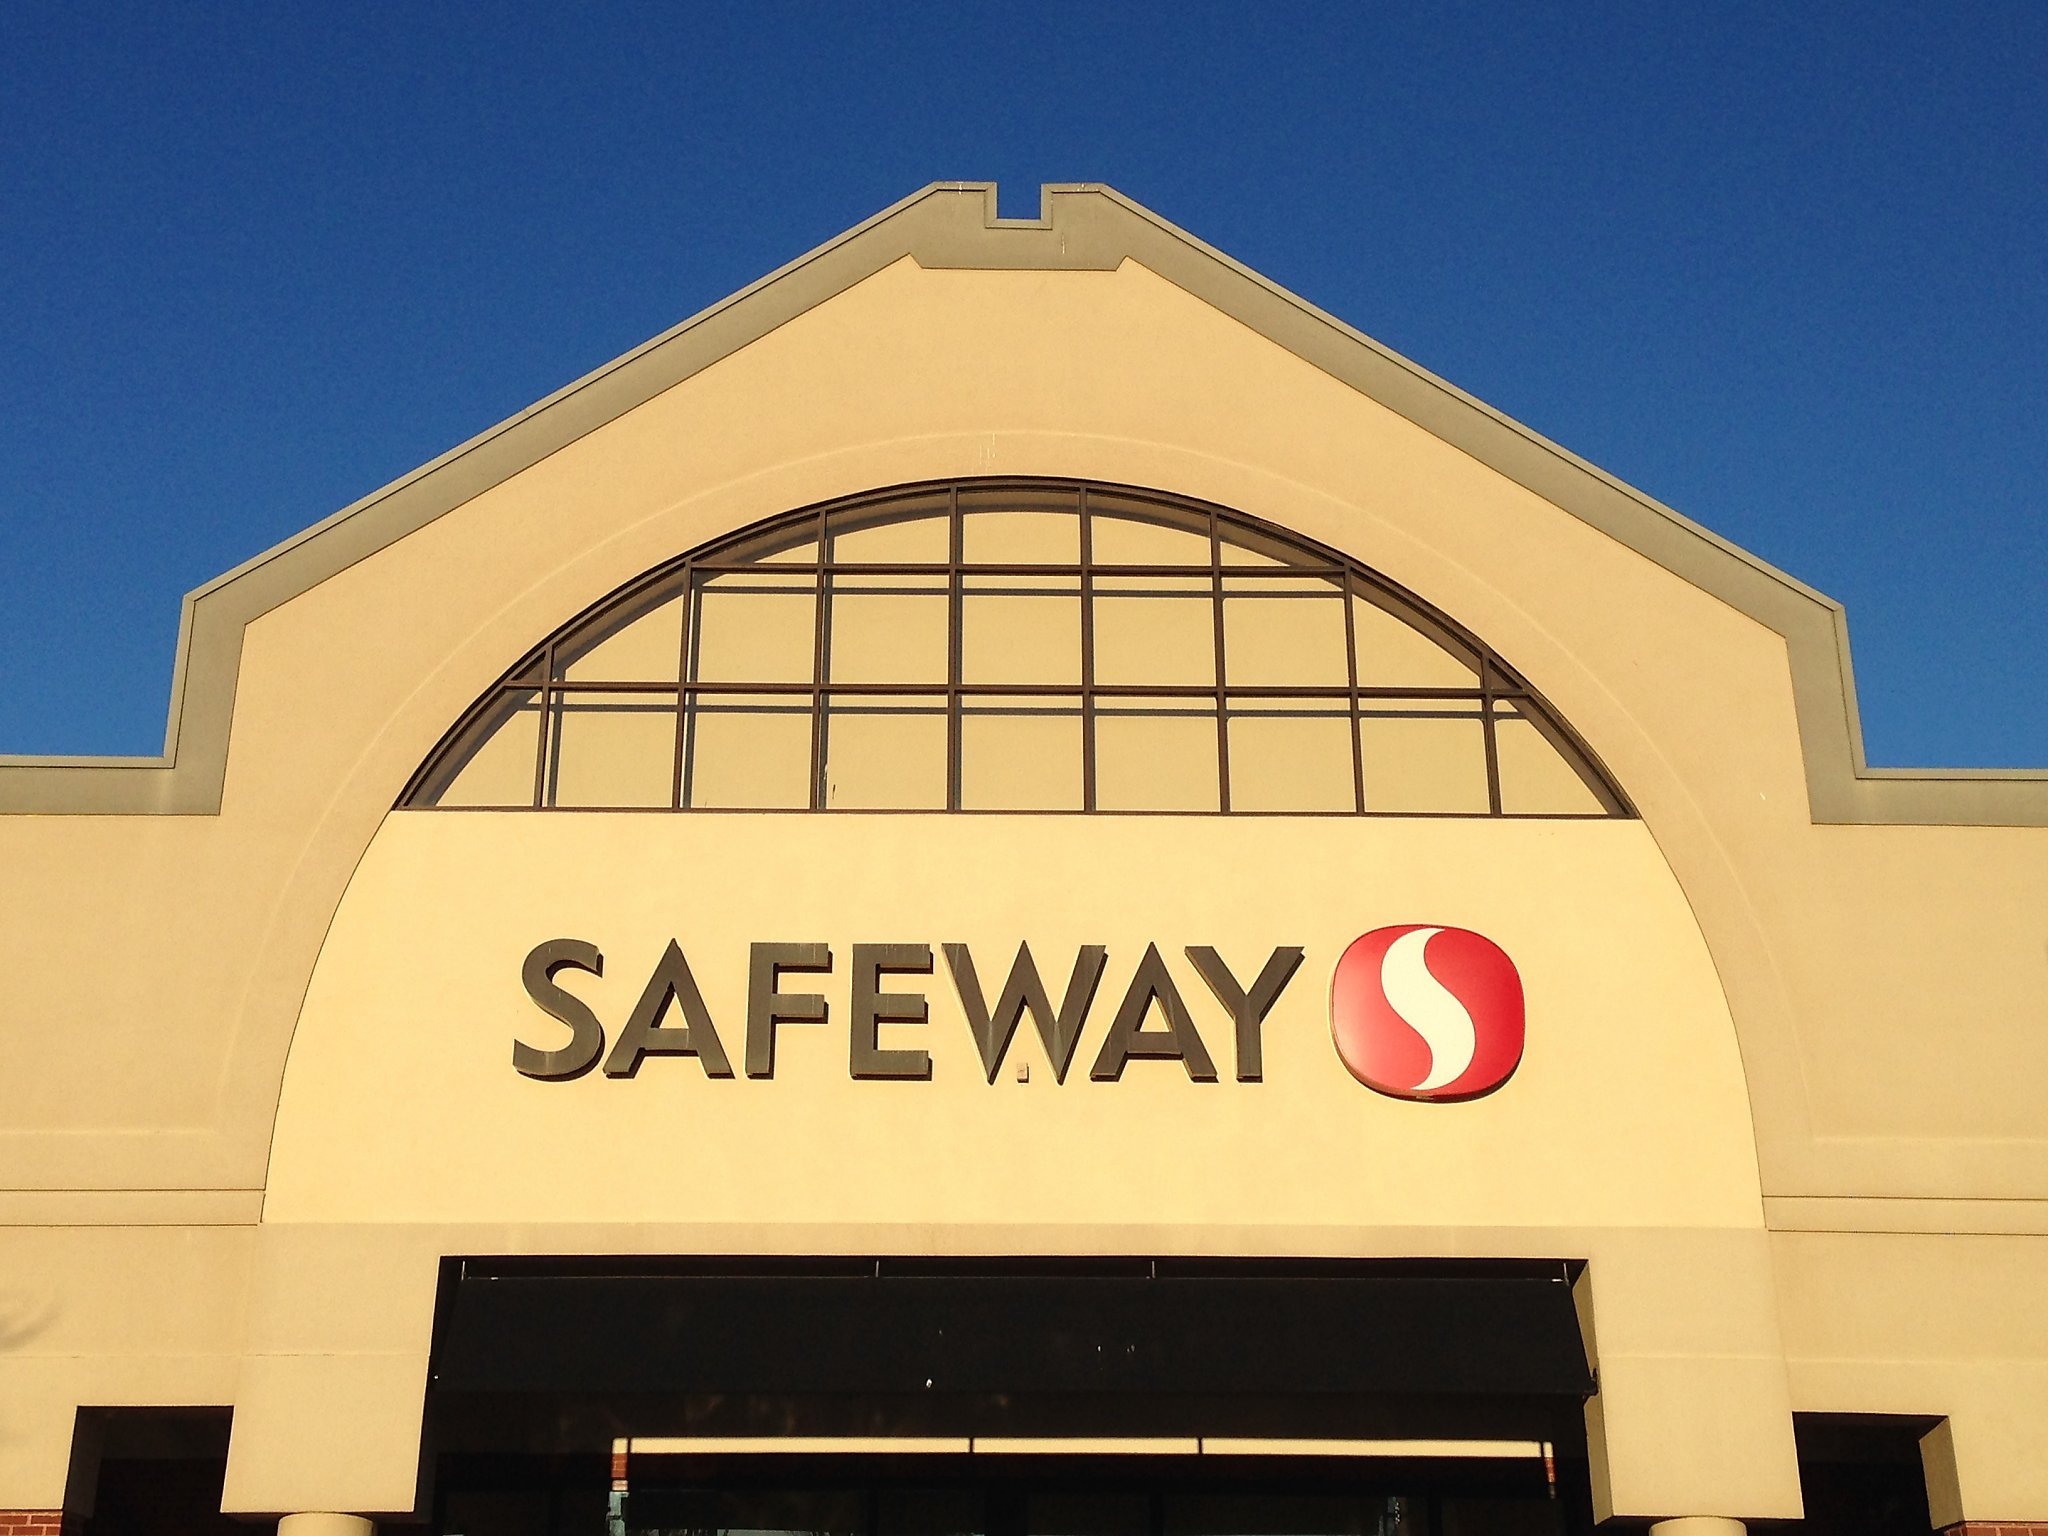 Walked right out': Customer vents about shoplifters leaving Olney Safeway  without penalty